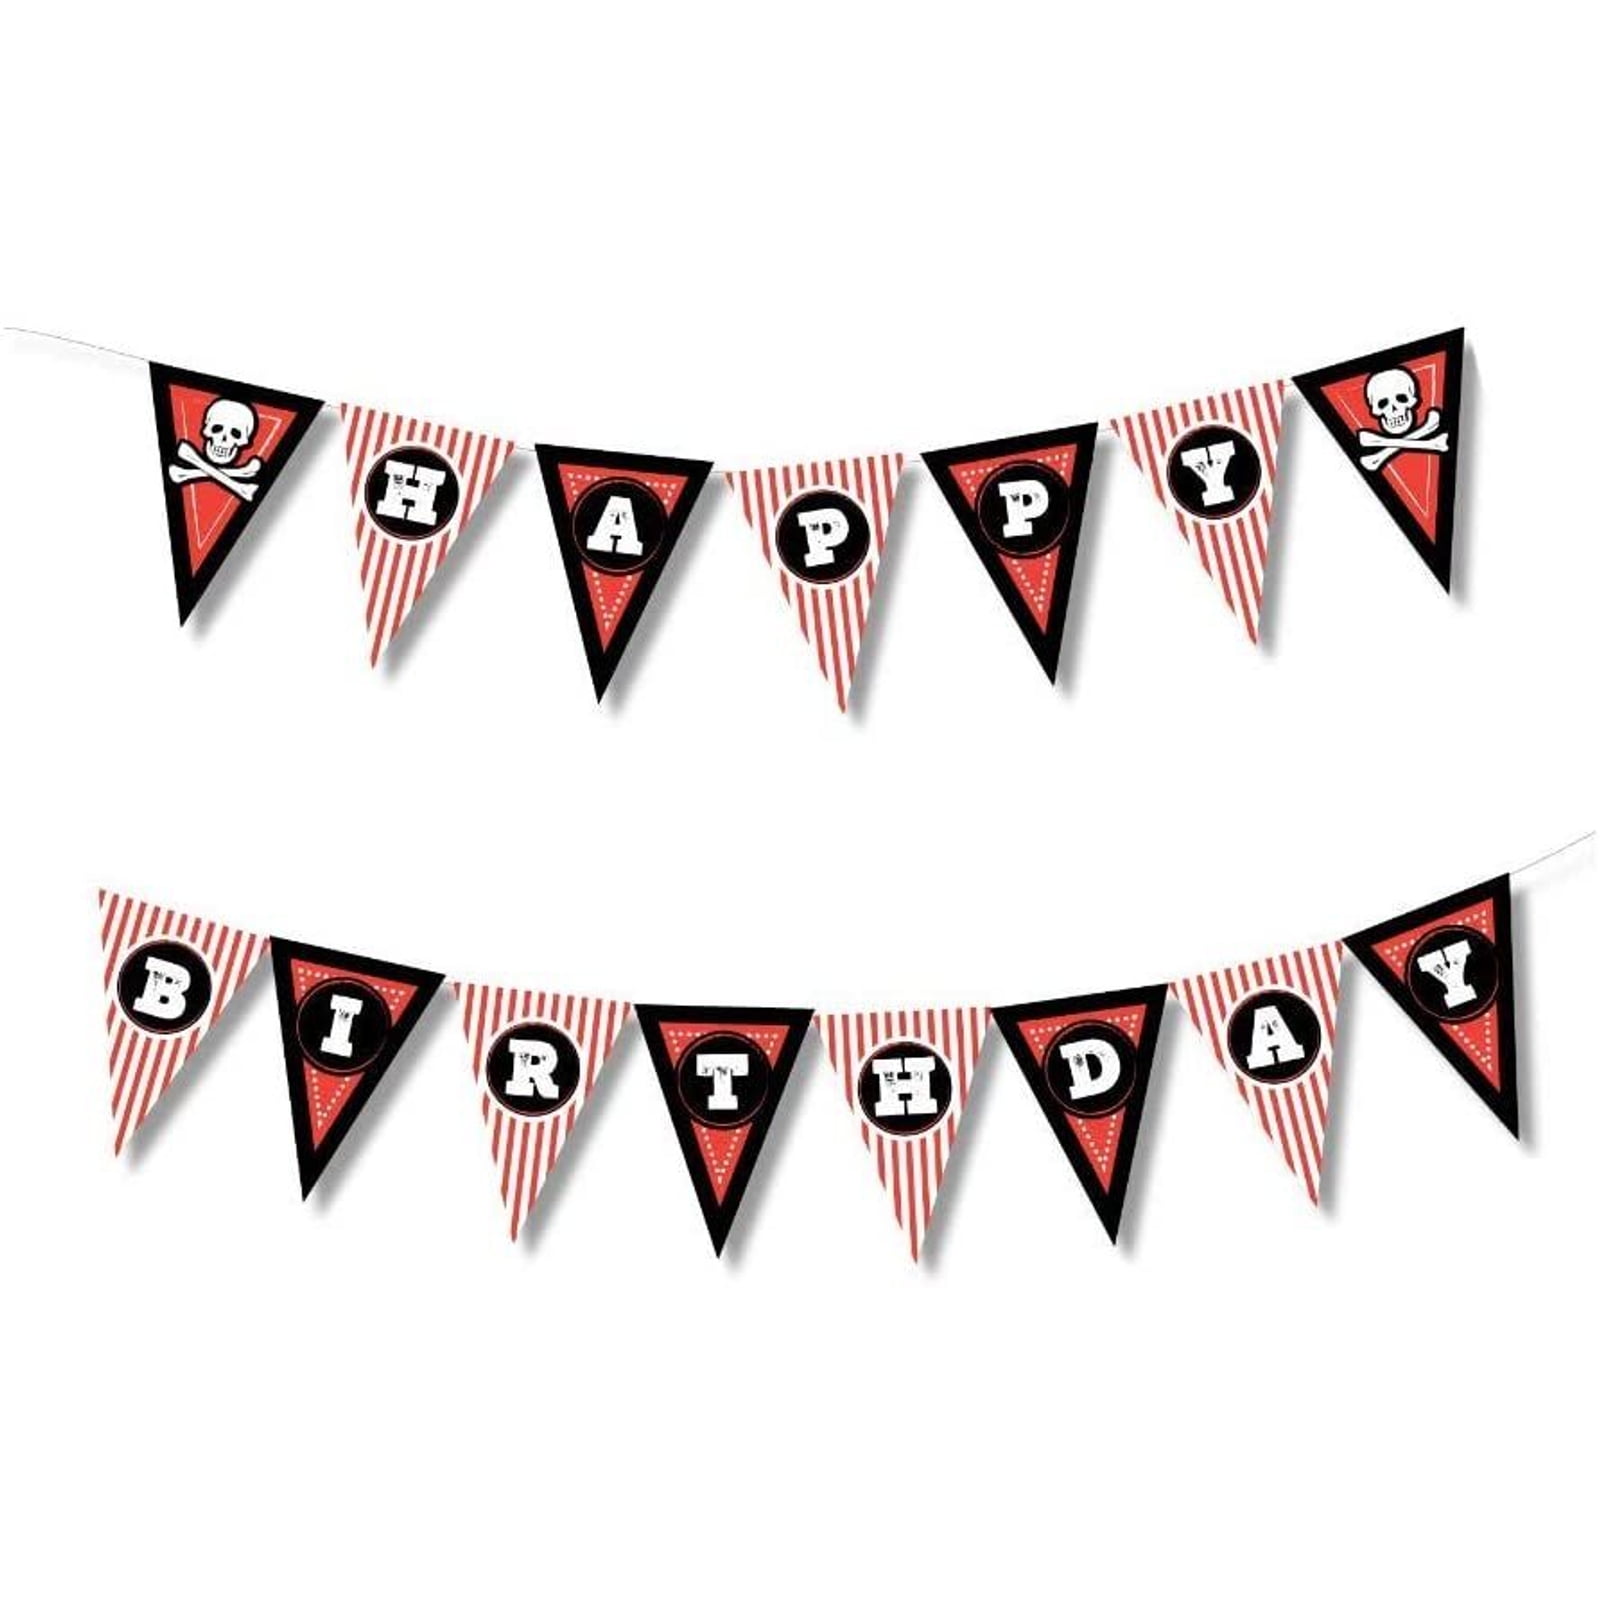 Pirate Night Sky 5ft x 3ft Flag Kids Party Banner Decoration 